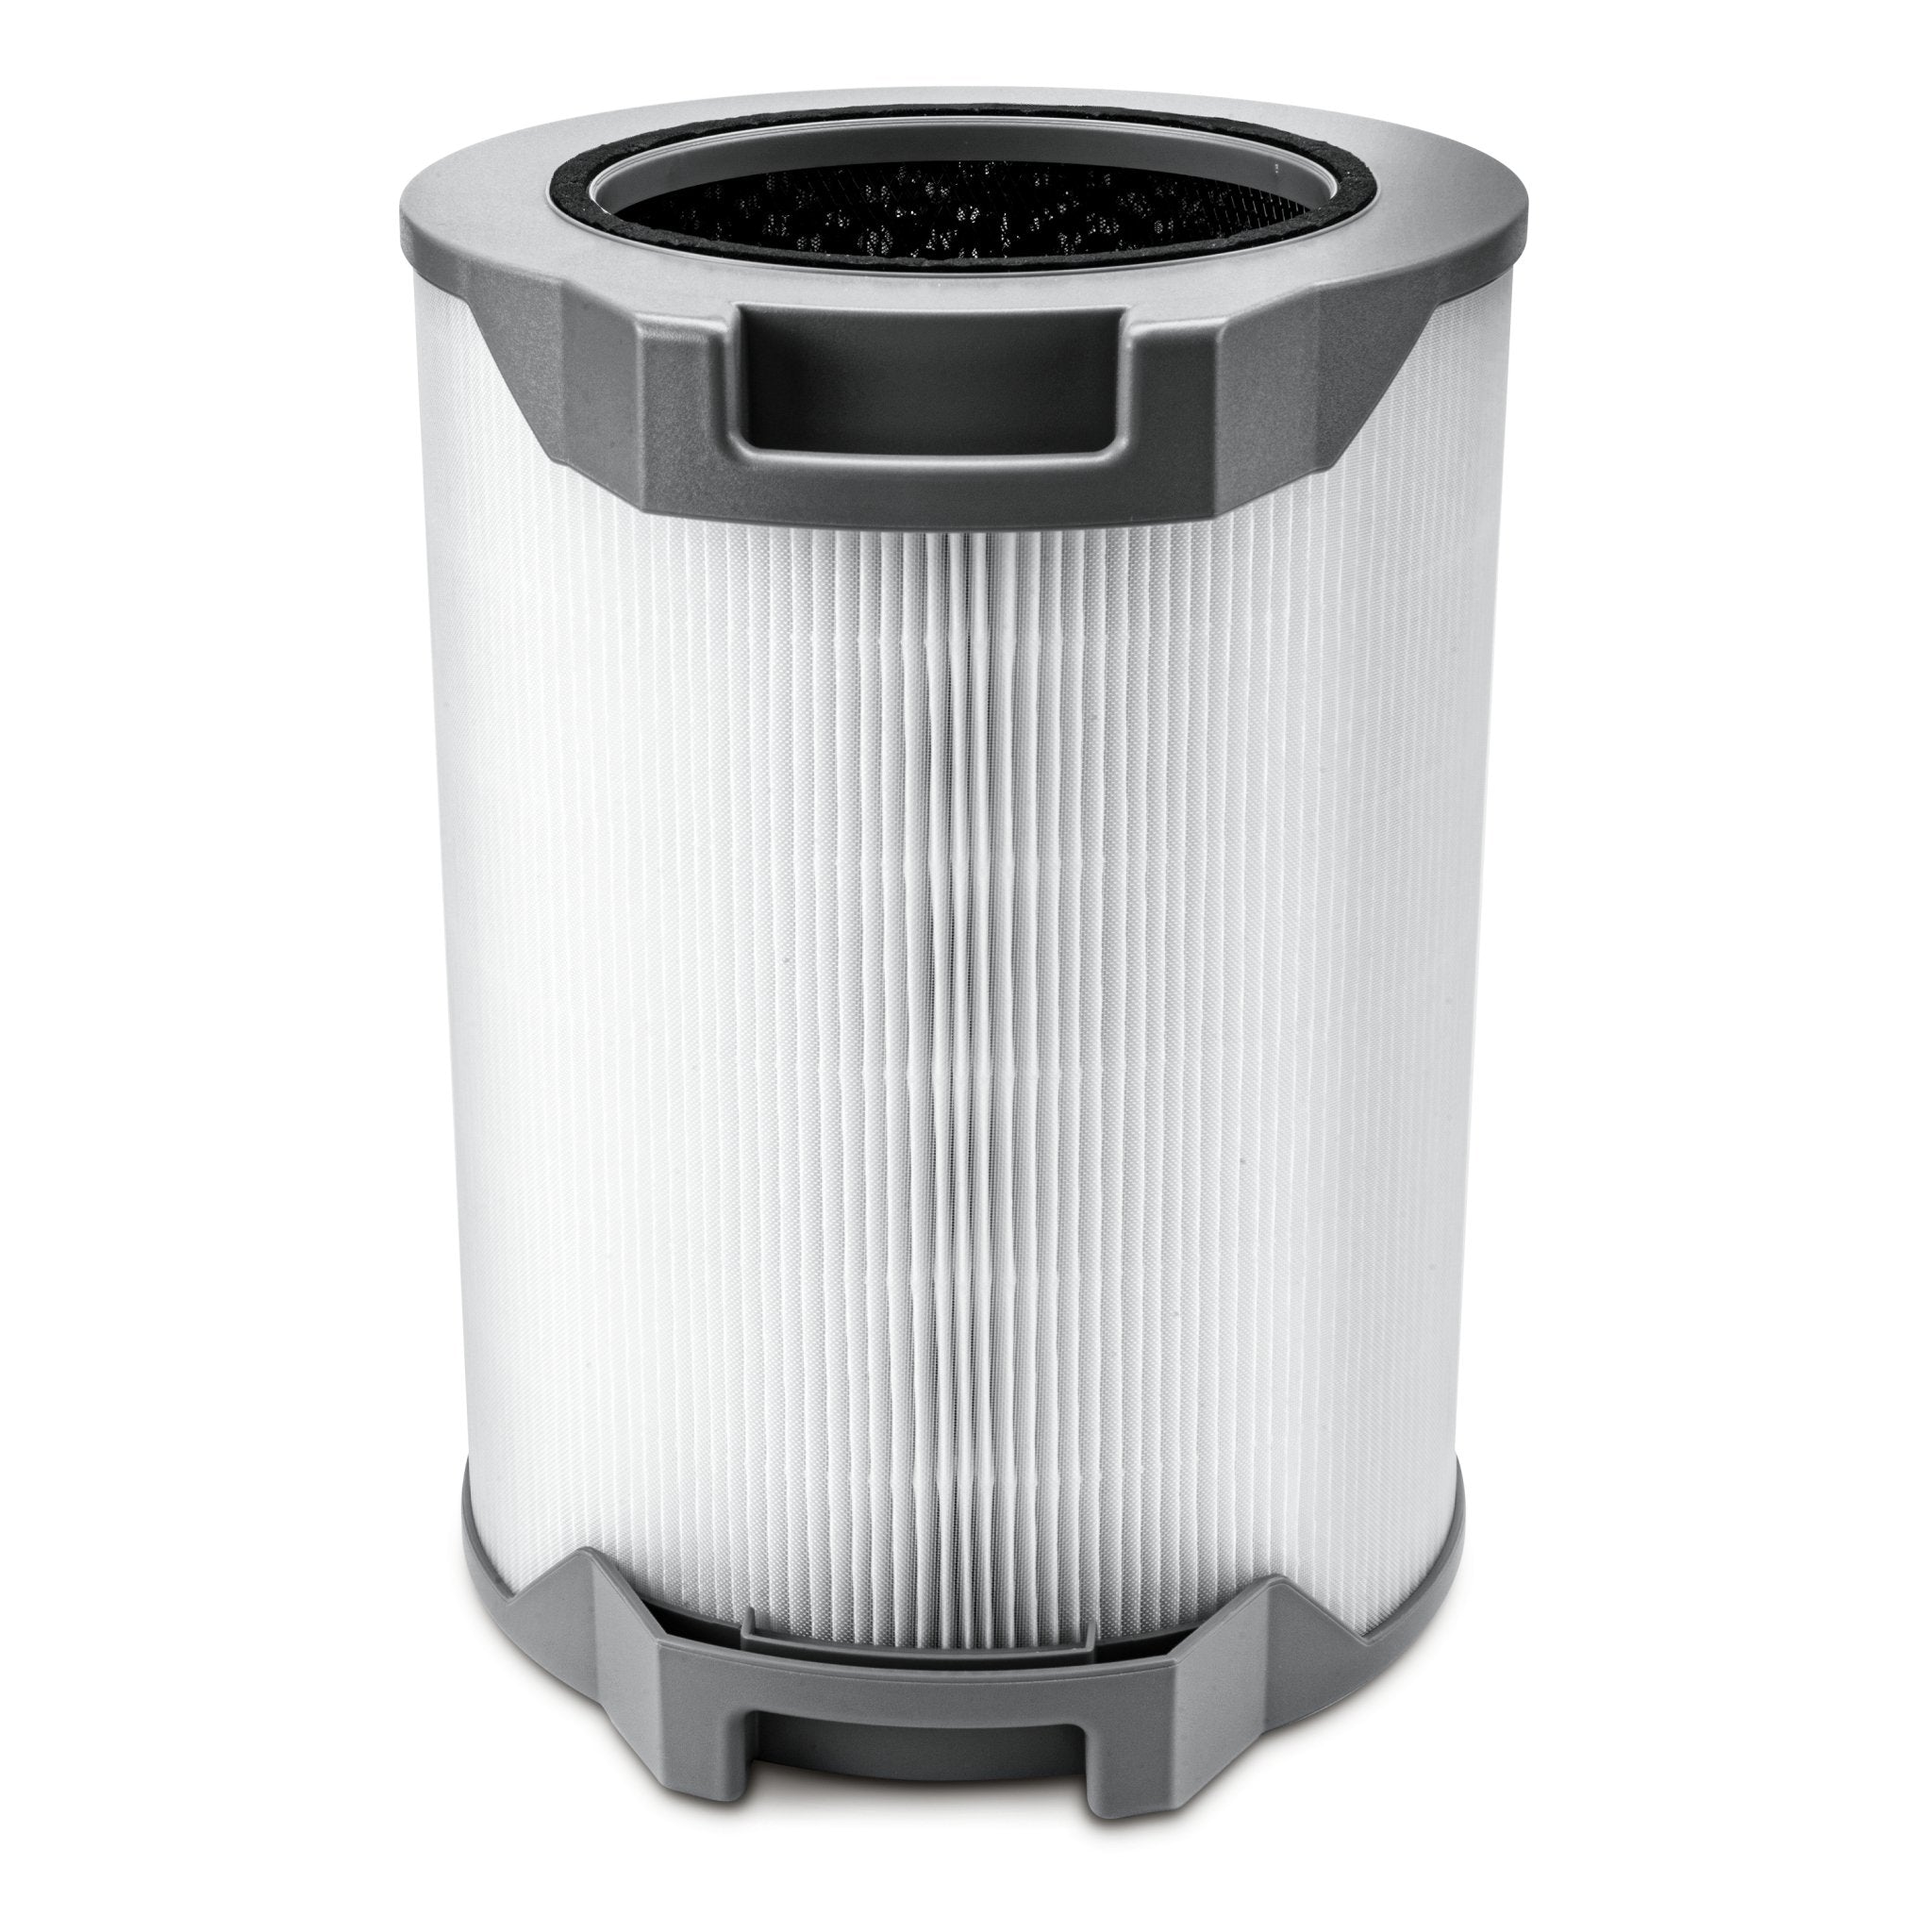 LV-H132 Replacement Filter for Levoit LV-H132 Air Purifier,3-in-1